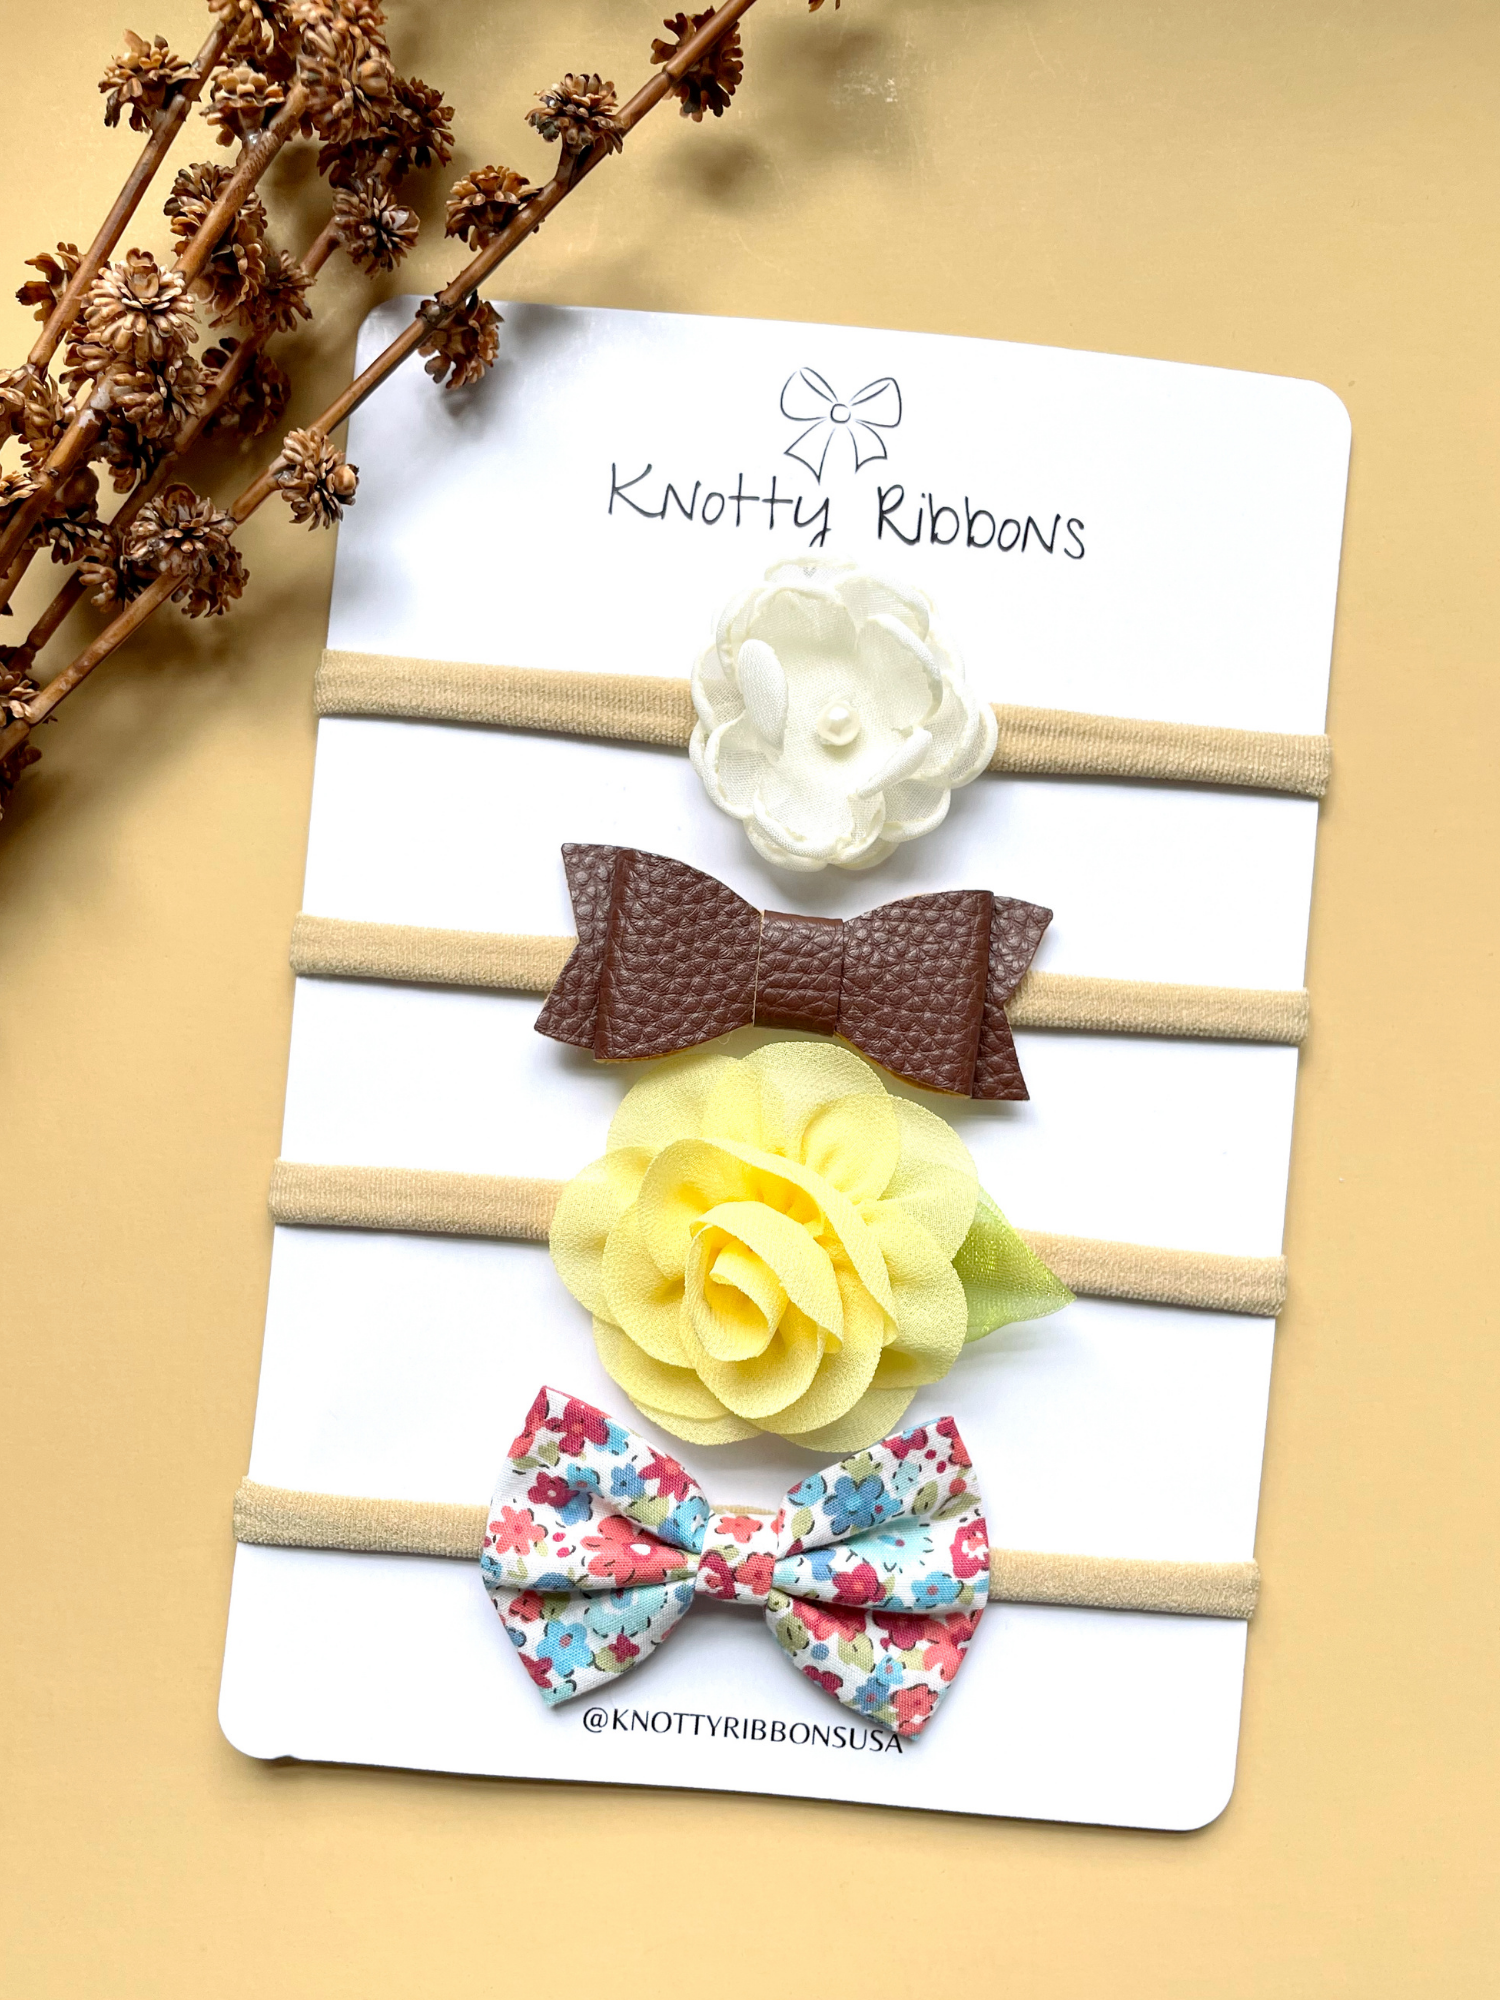 Flower & Floral Bow Headband Set- White, Brown & Yellow